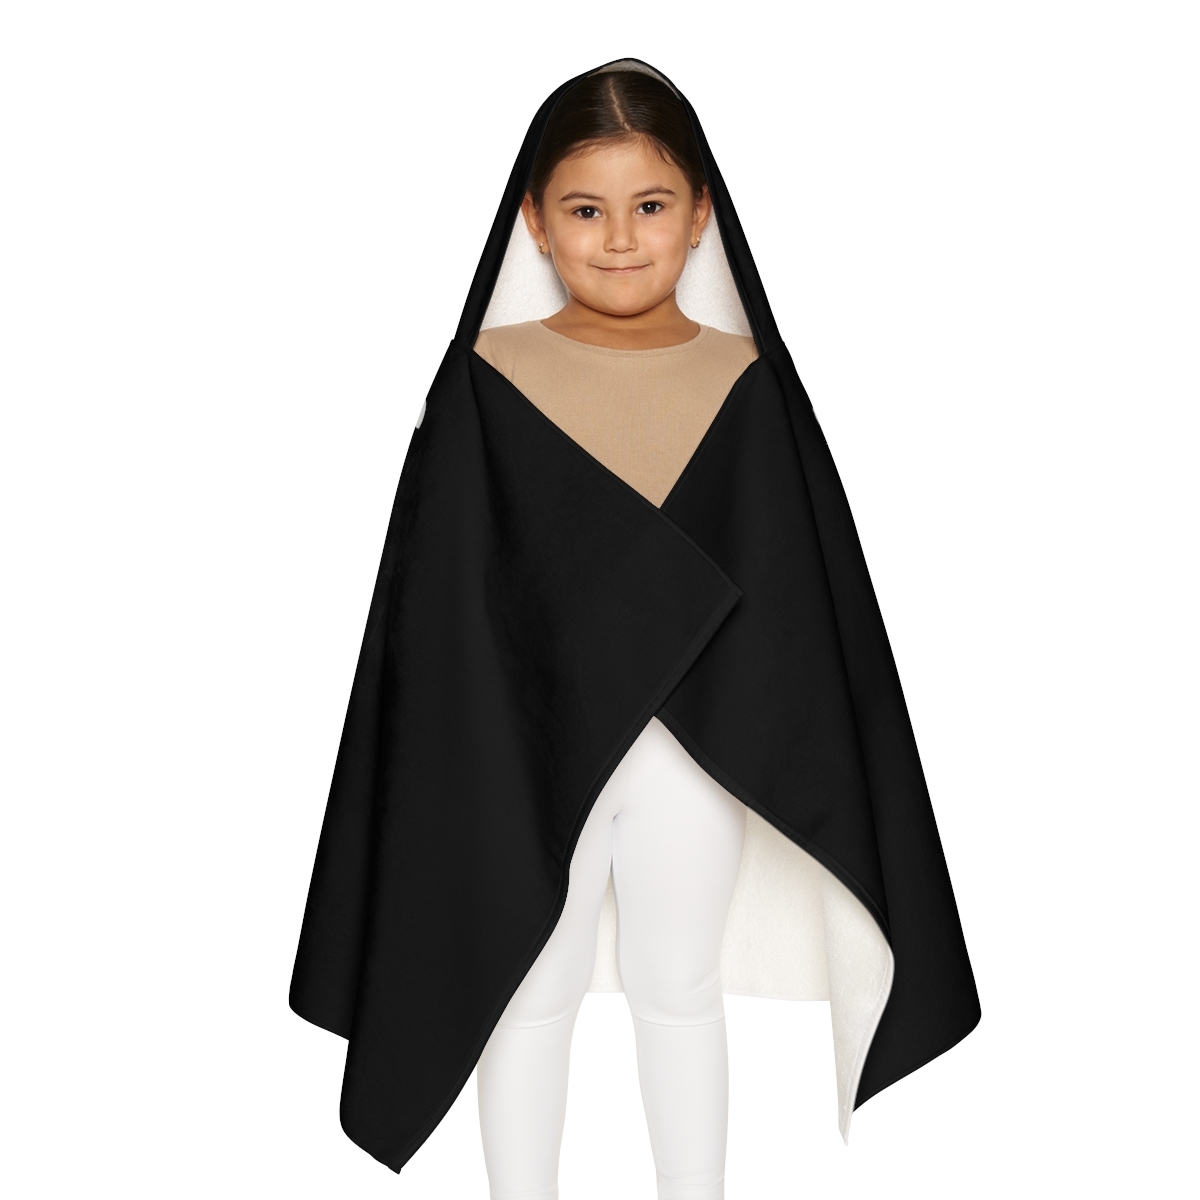 Primary image for Youth Hooded Towel:Adventures Are The Best Way To Learn